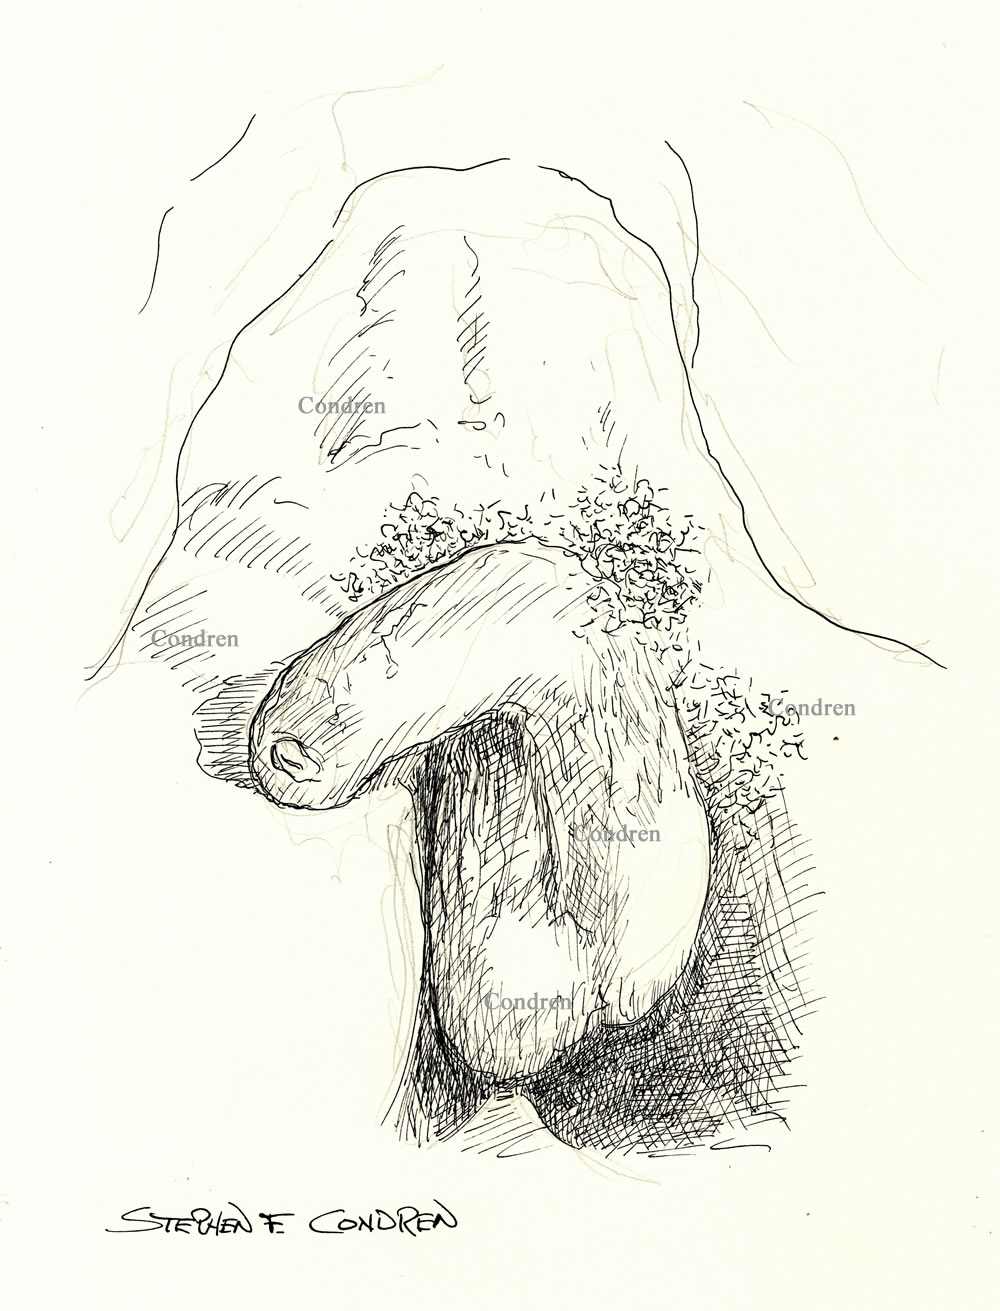 Pen & ink figure drawing of a soft (flaccid) uncut penis with huge hairy balls hanging between his legs.